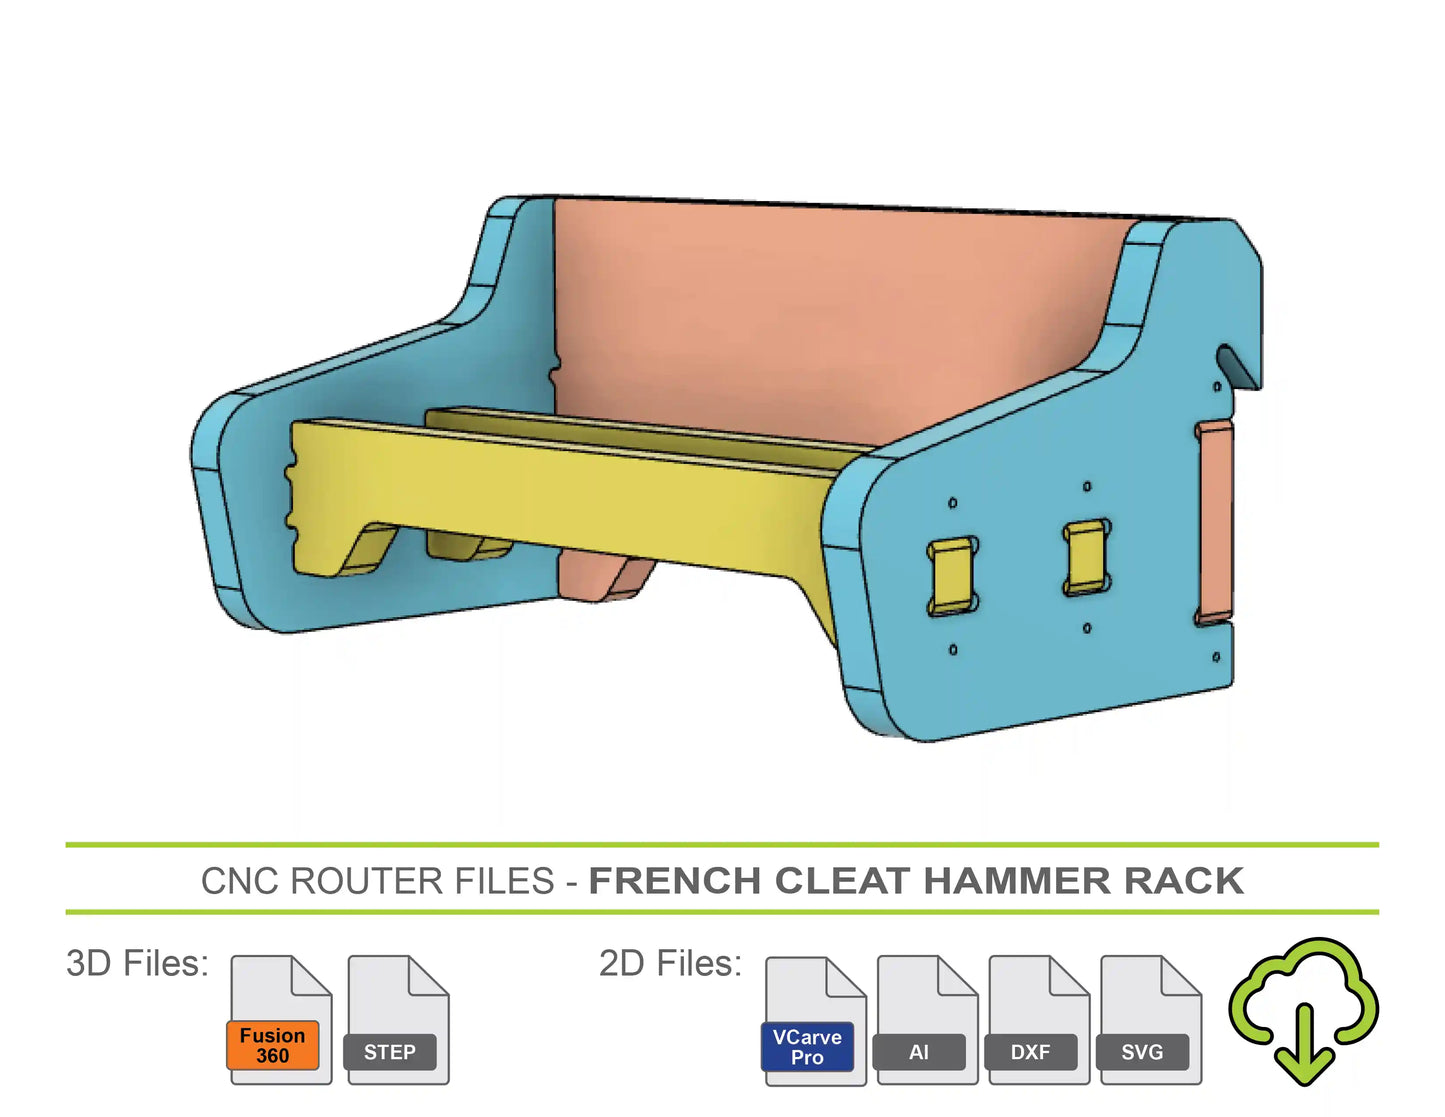 CNC Router Files French Cleat Hammer Rack